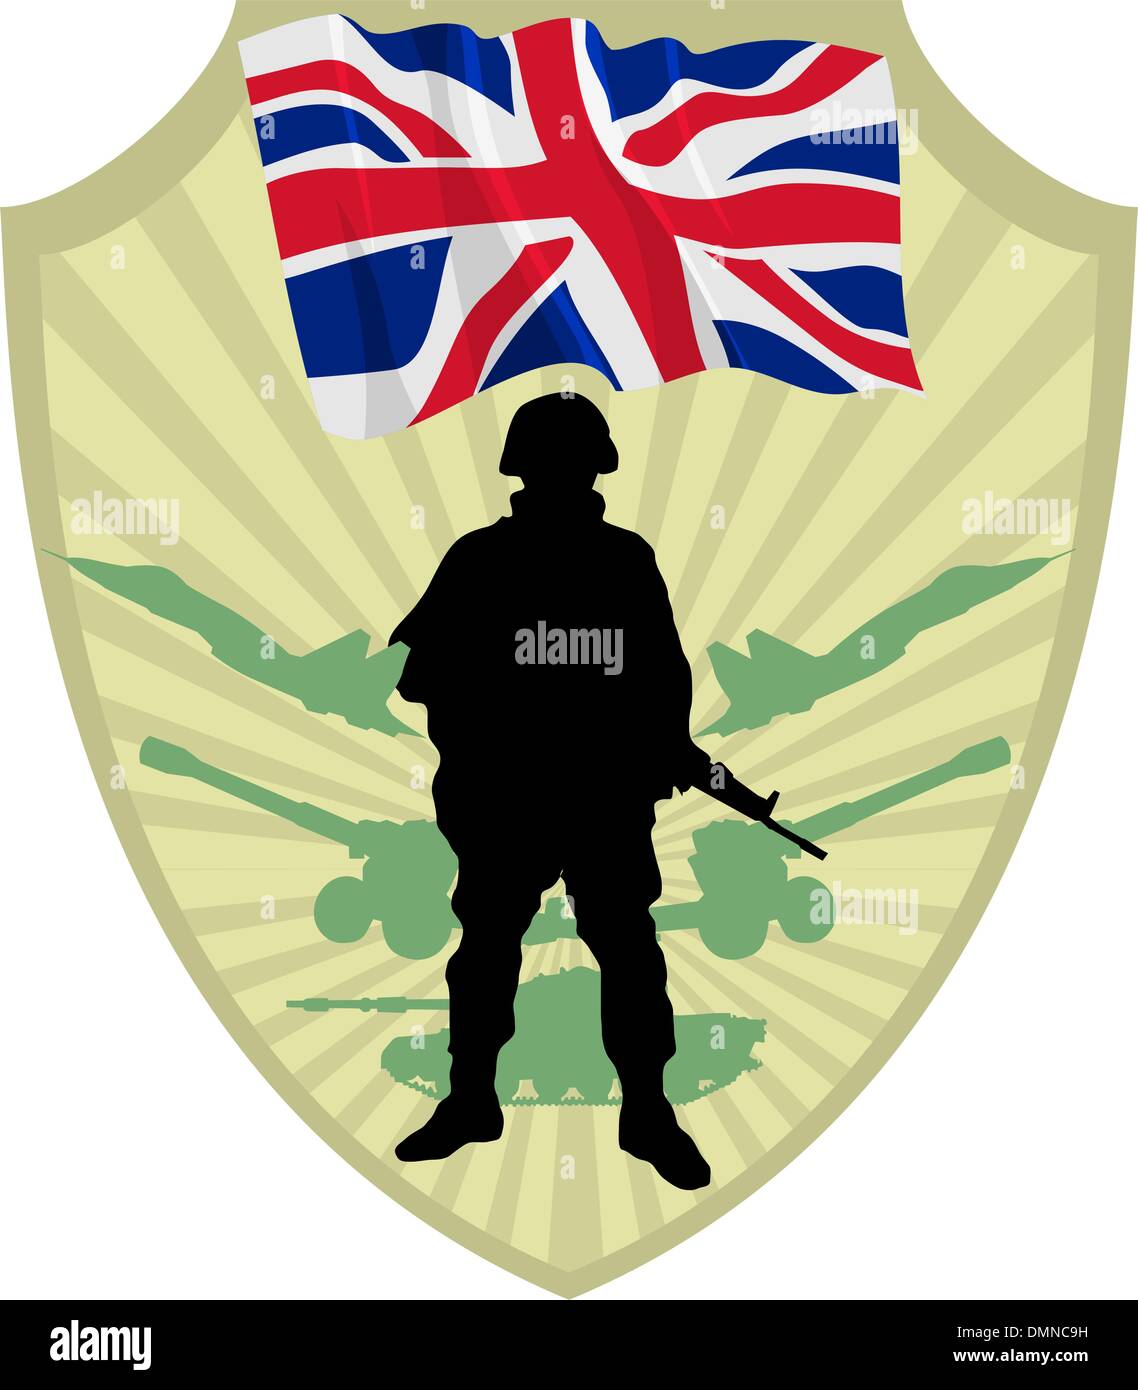 Army of United Kingdom Stock Vector